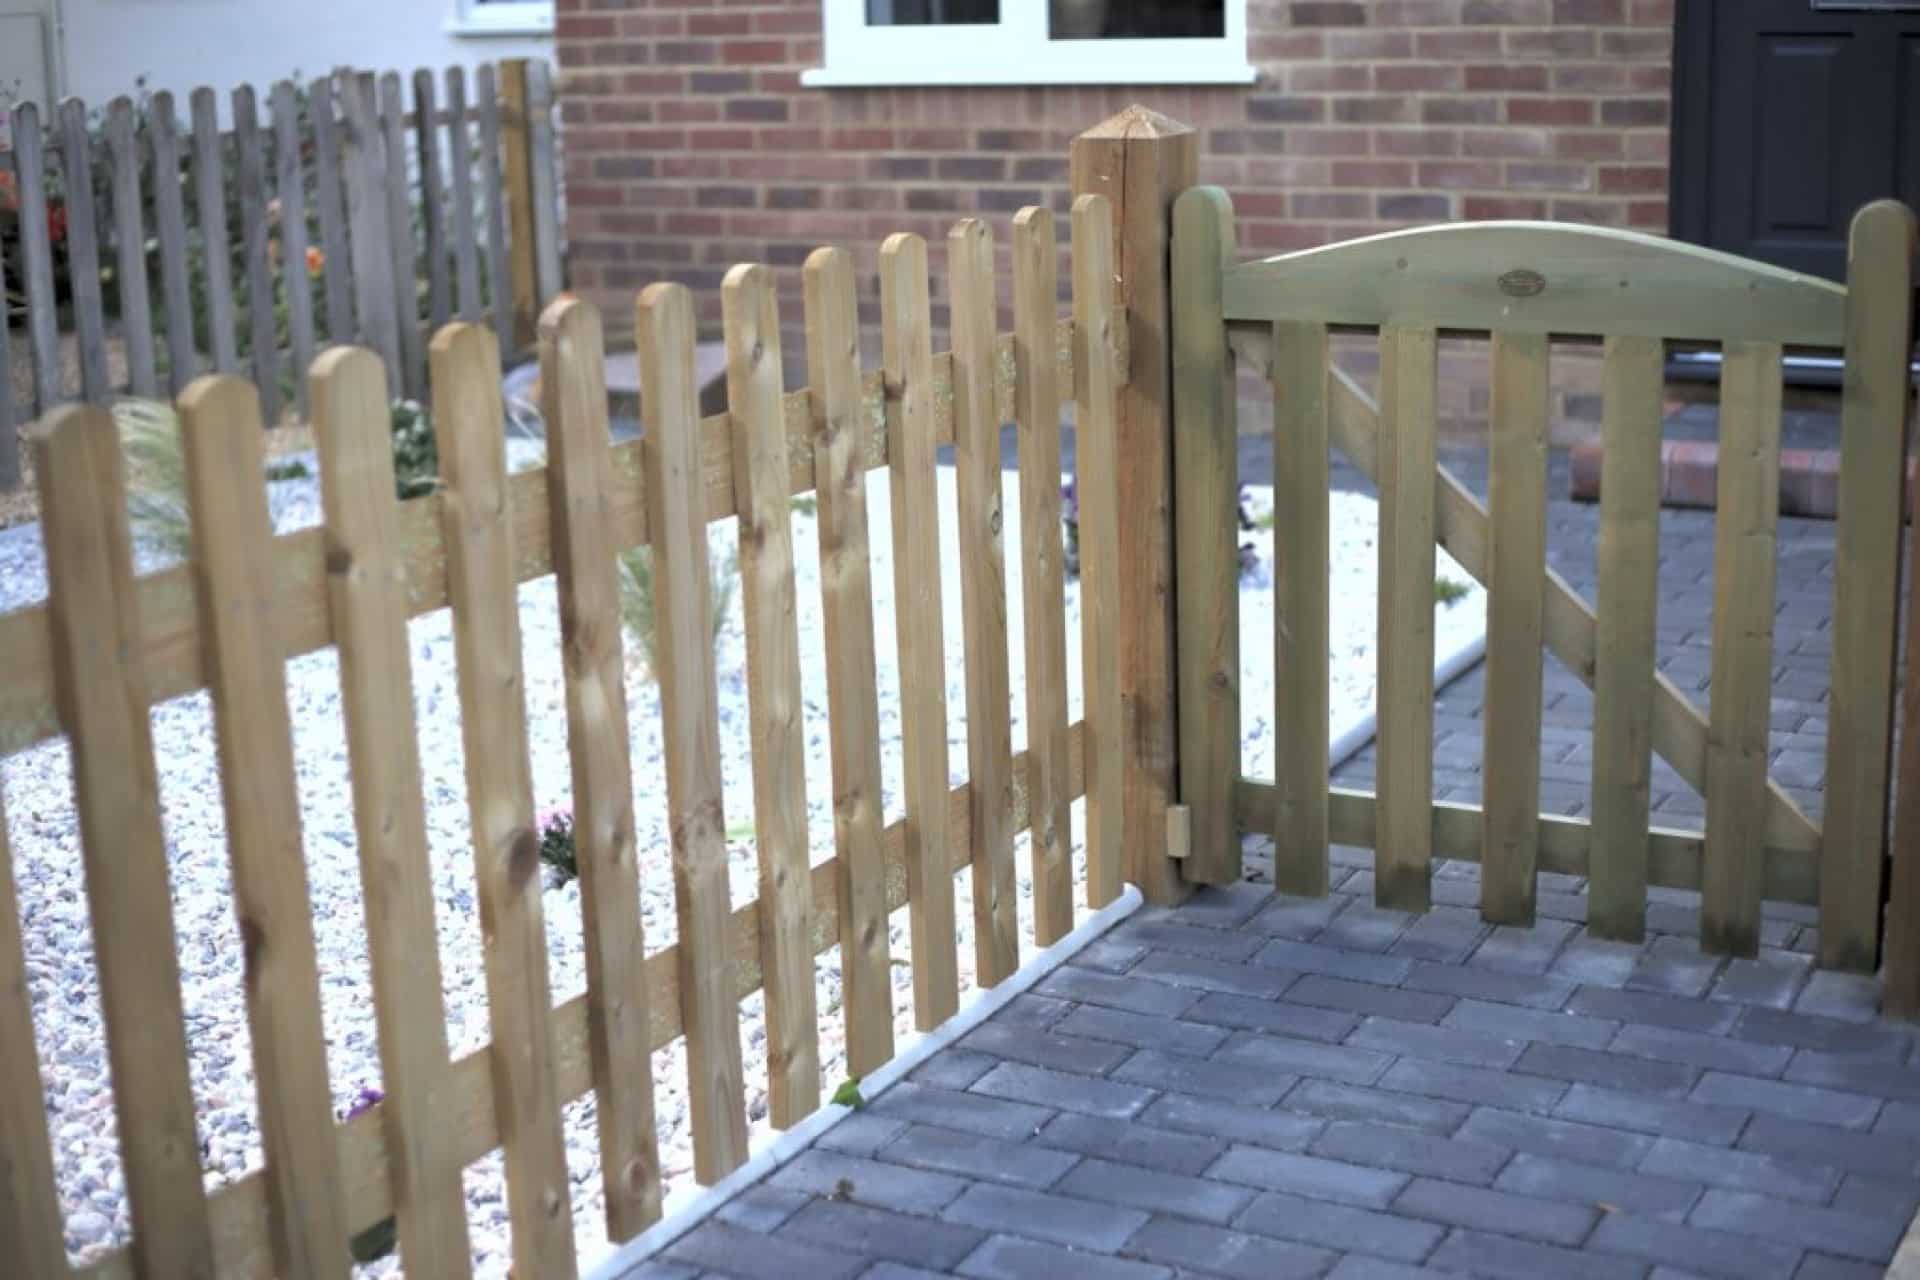 Qualified Bath Fencing experts